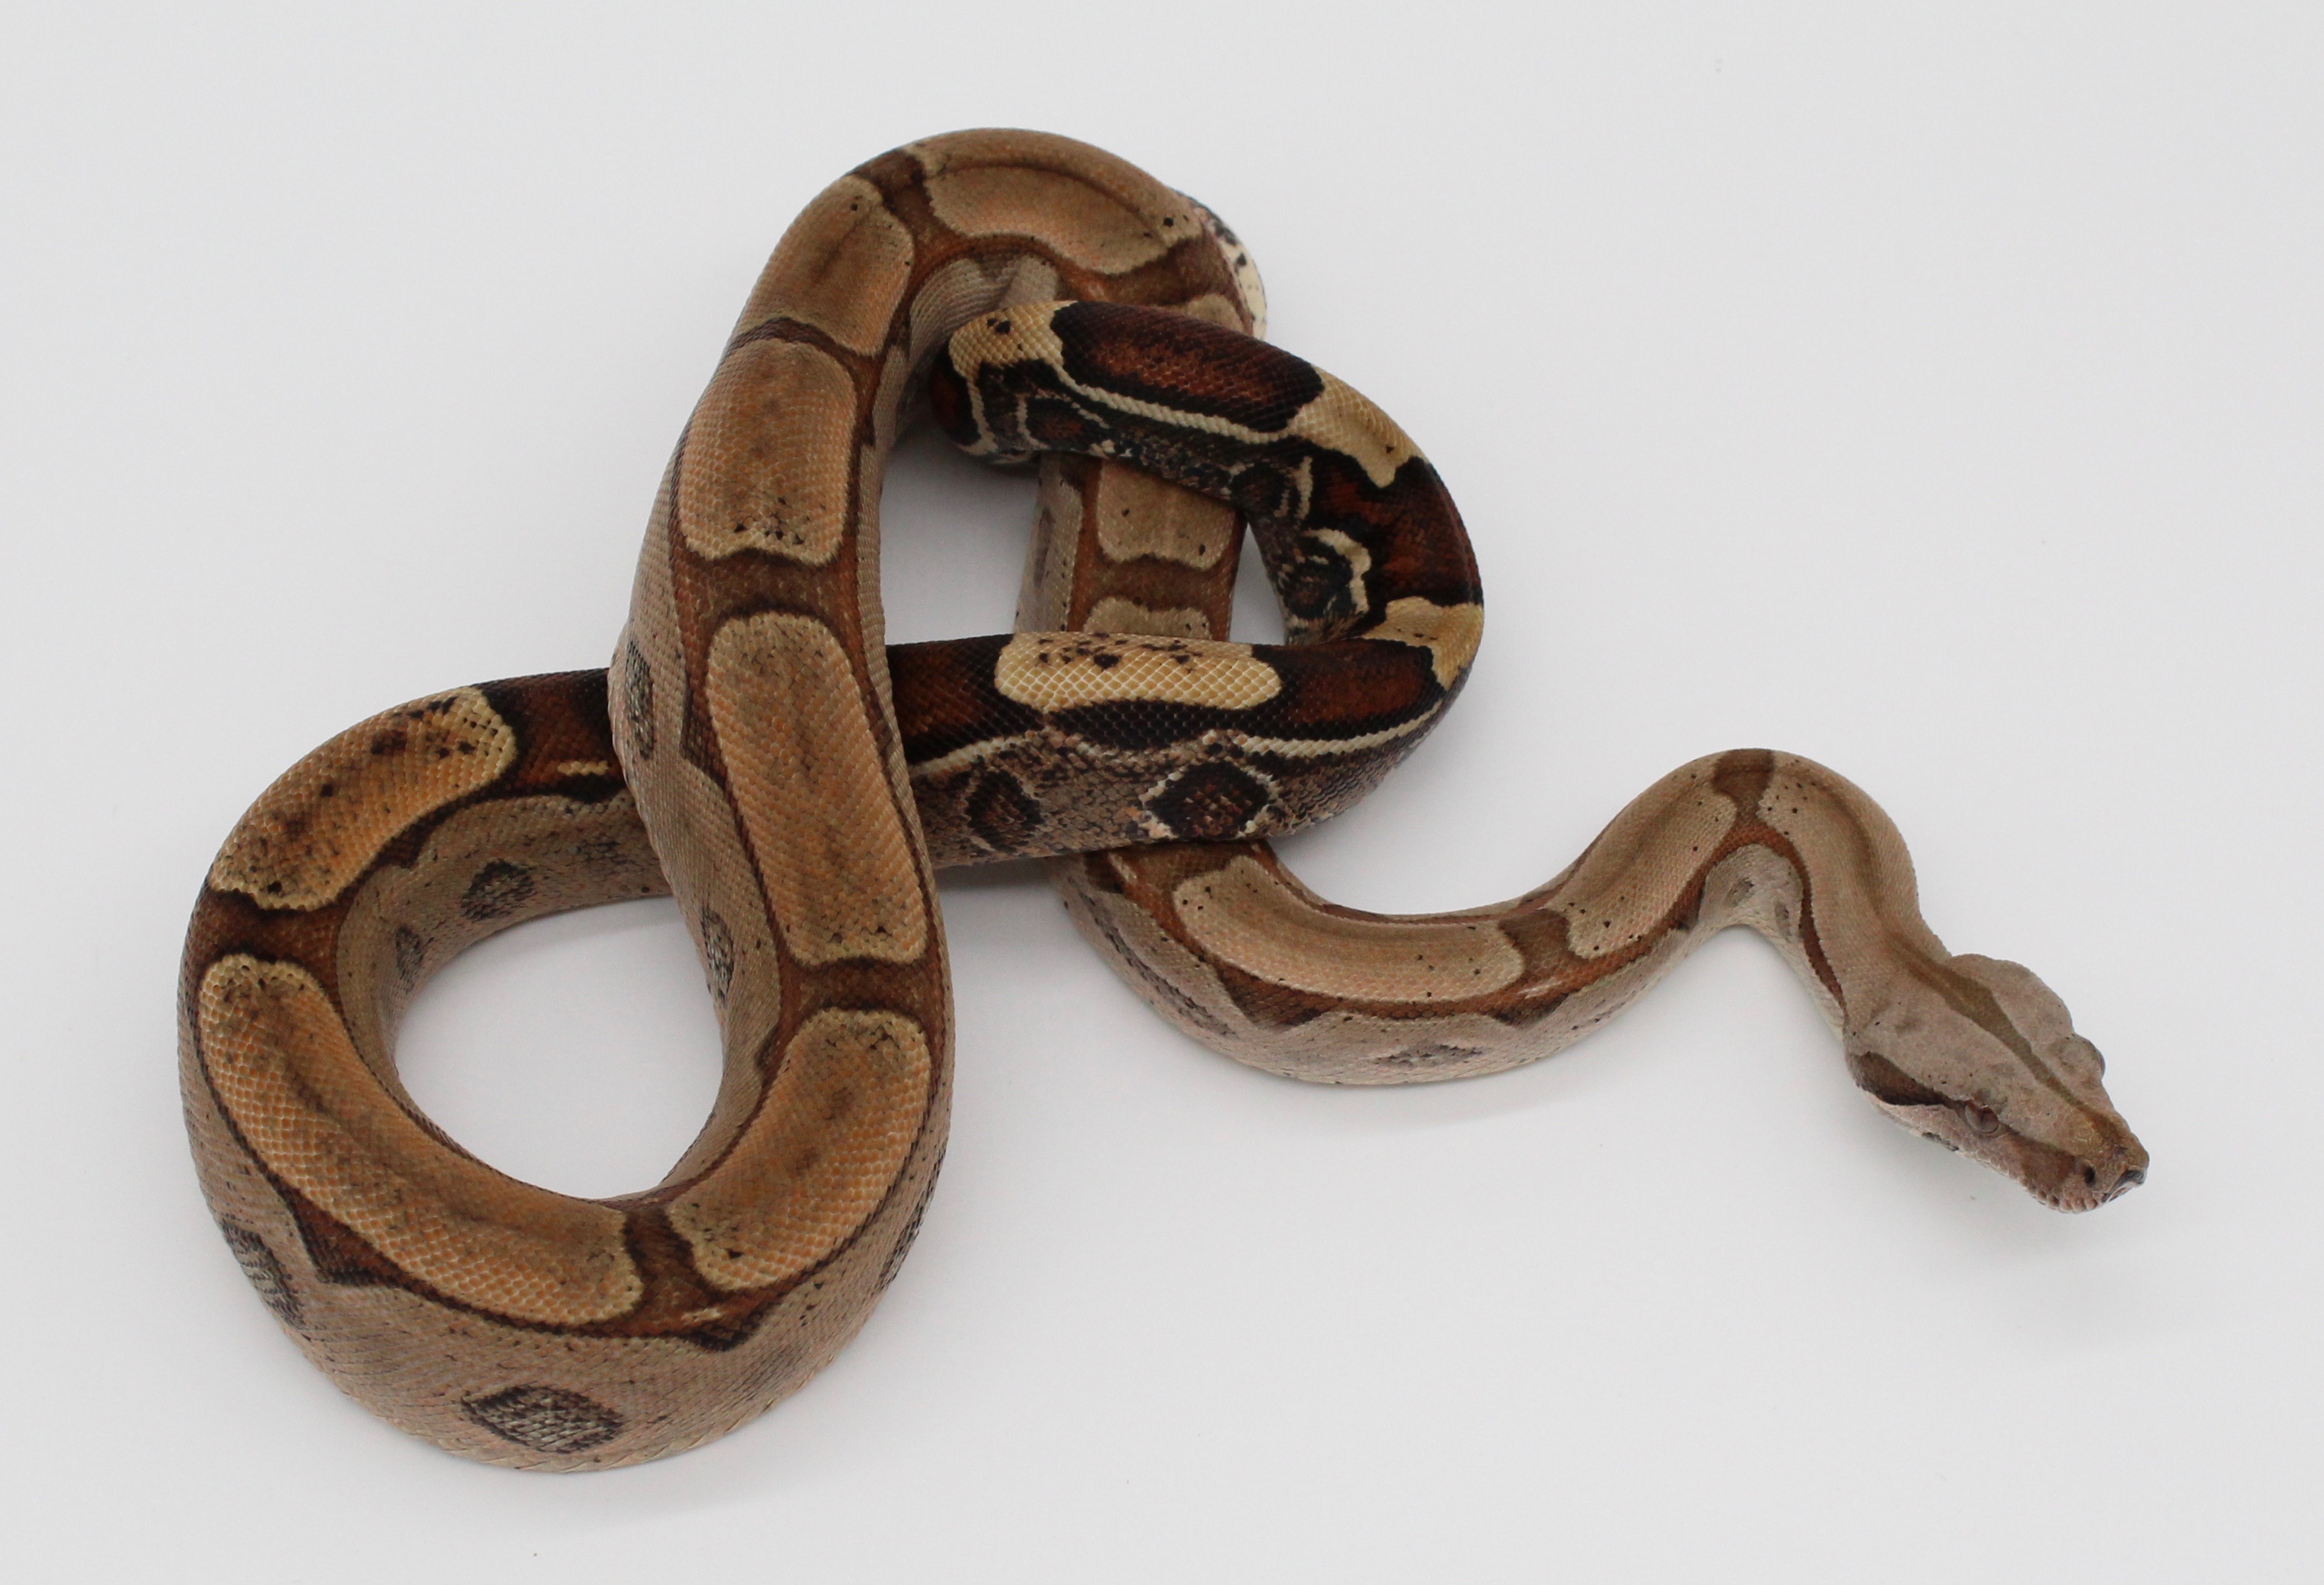 Keywest Boa Constrictor by Pro Herps